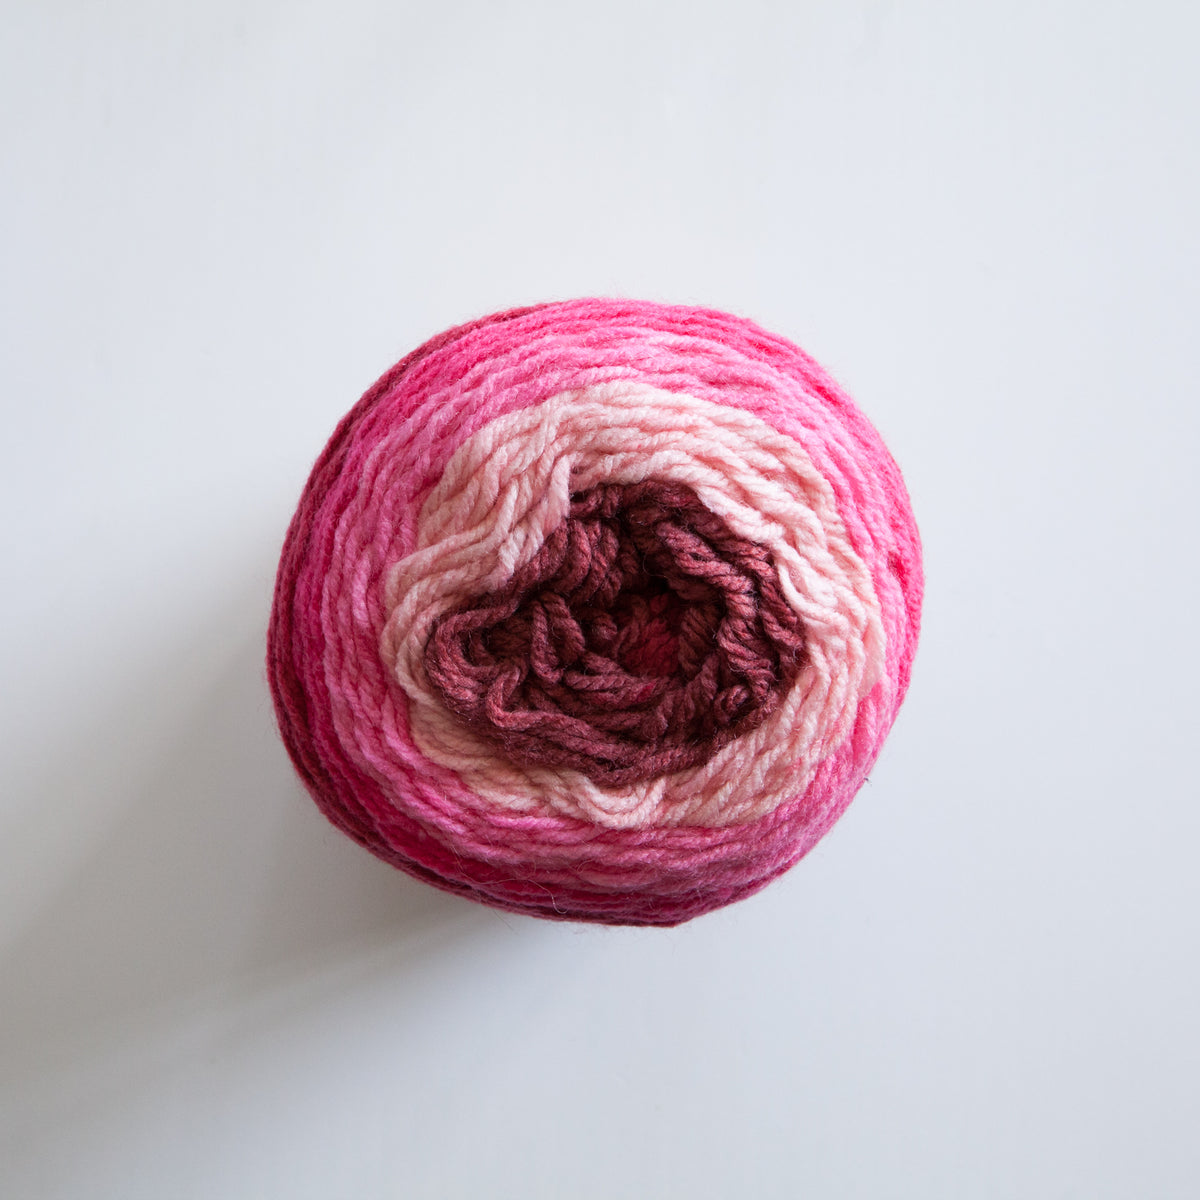 Browse Magic Colour Yarn Cakes 10 Ply Acrylic Polyester Wool Mix - Multi  Pink Woolworx , and more. Stop by our store today to get huge savings